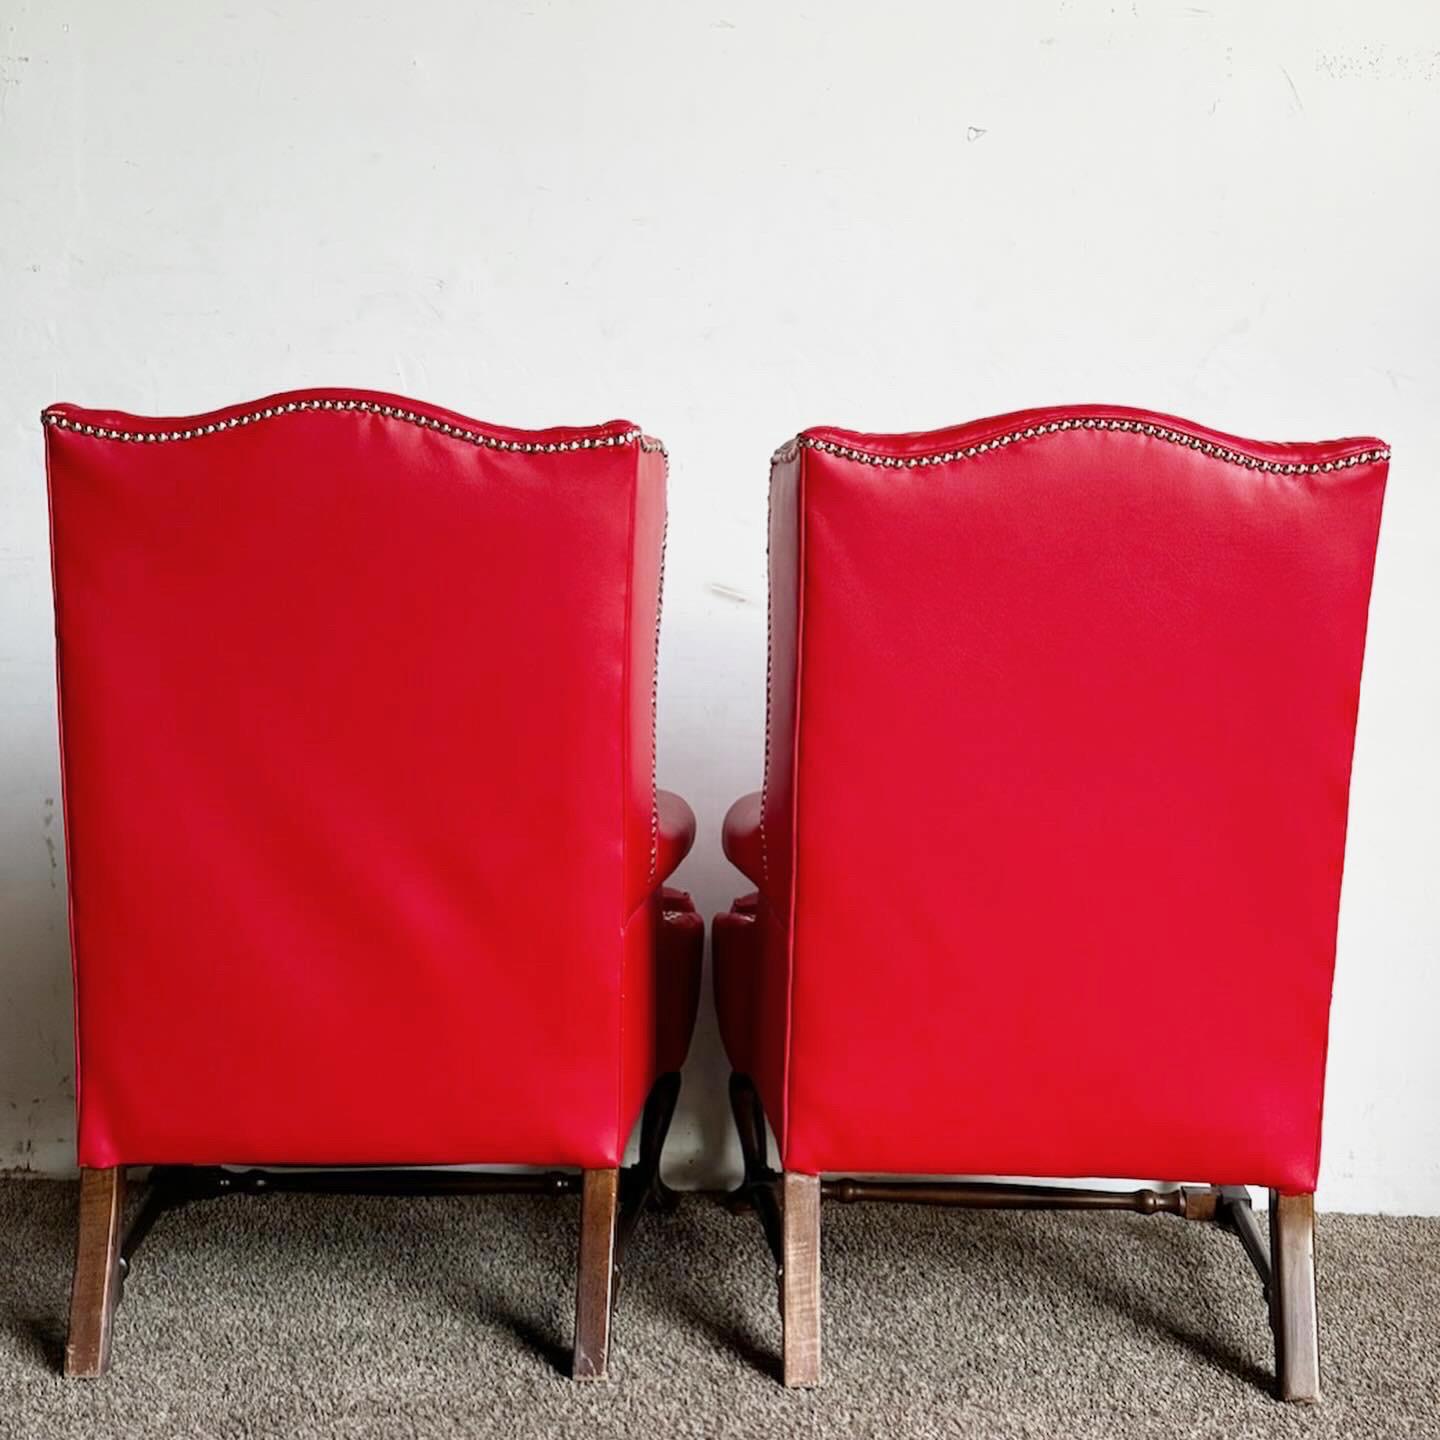 The Traditional Red Faux Leather Wingback Chairs, available as a pair, bring timeless elegance to your decor. With a classic wingback silhouette, these chairs offer style and comfort. The rich red faux leather upholstery adds sophistication and